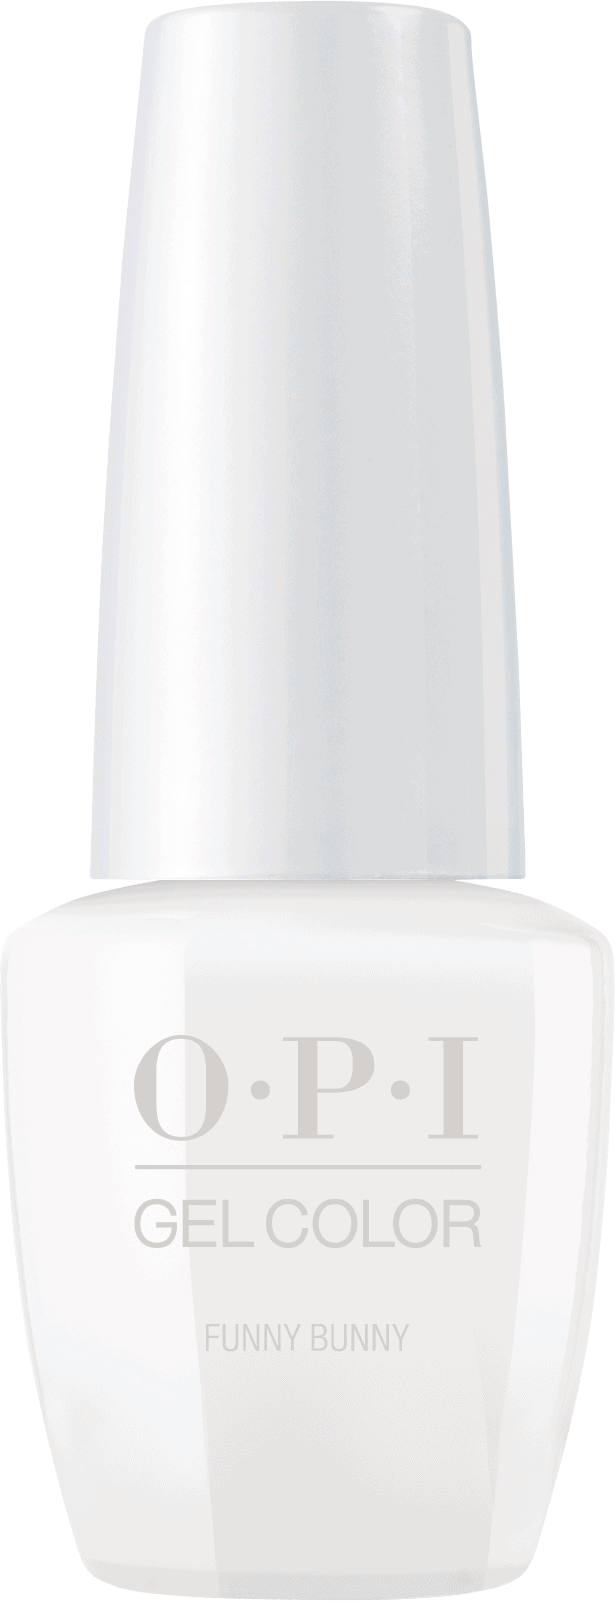 Opi Gelcolor 2 0 Gel Polish Colors Permanent Collection Mk Beauty Club